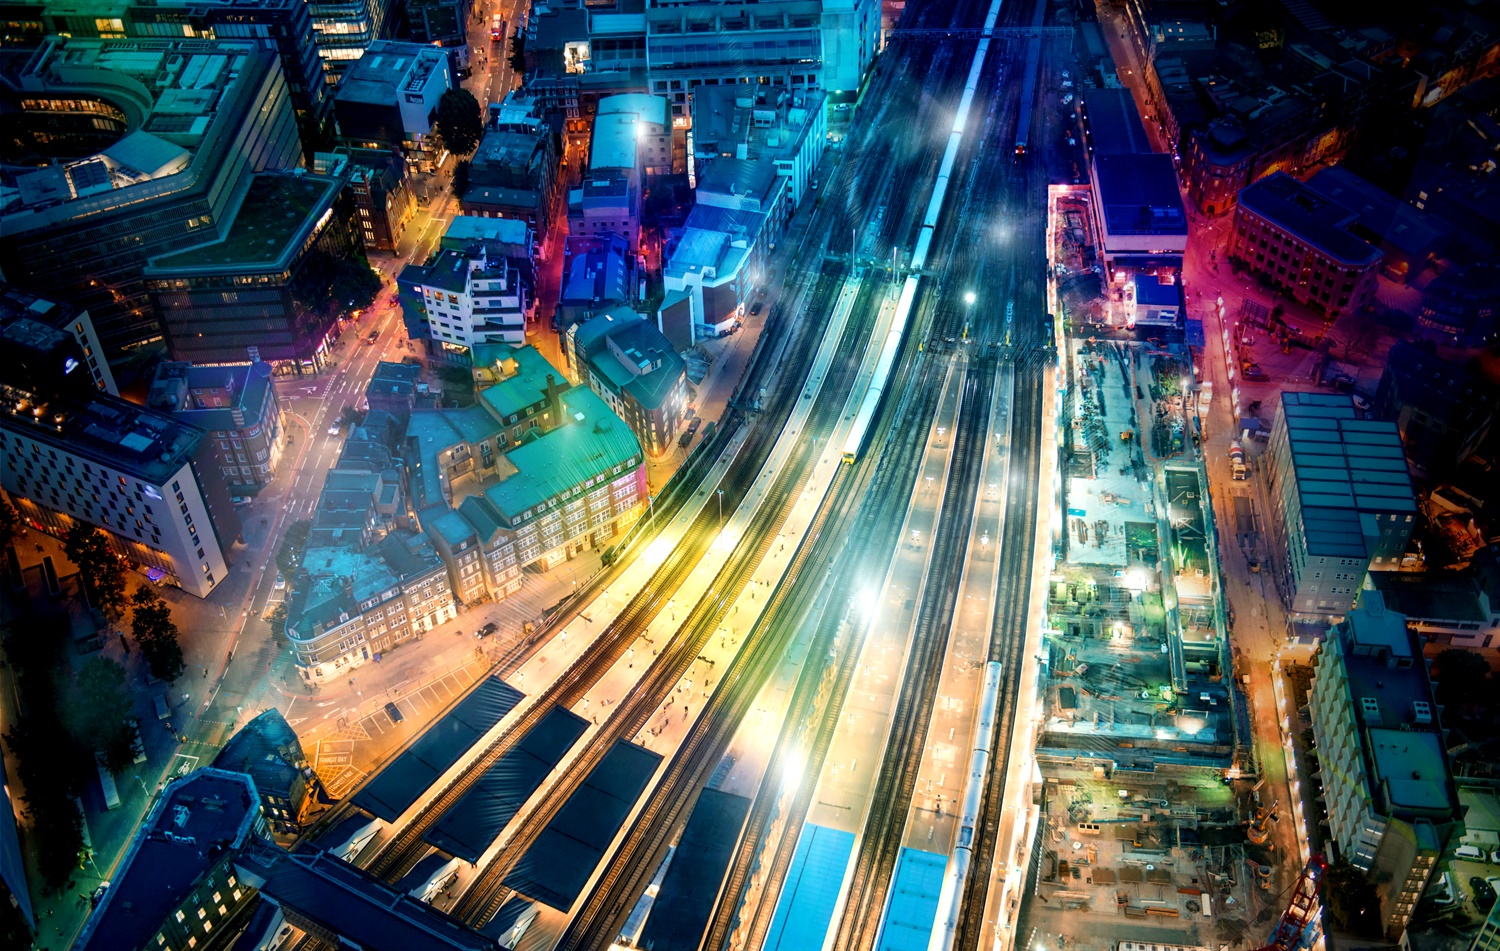 Digital Railway: From potential to kinetic